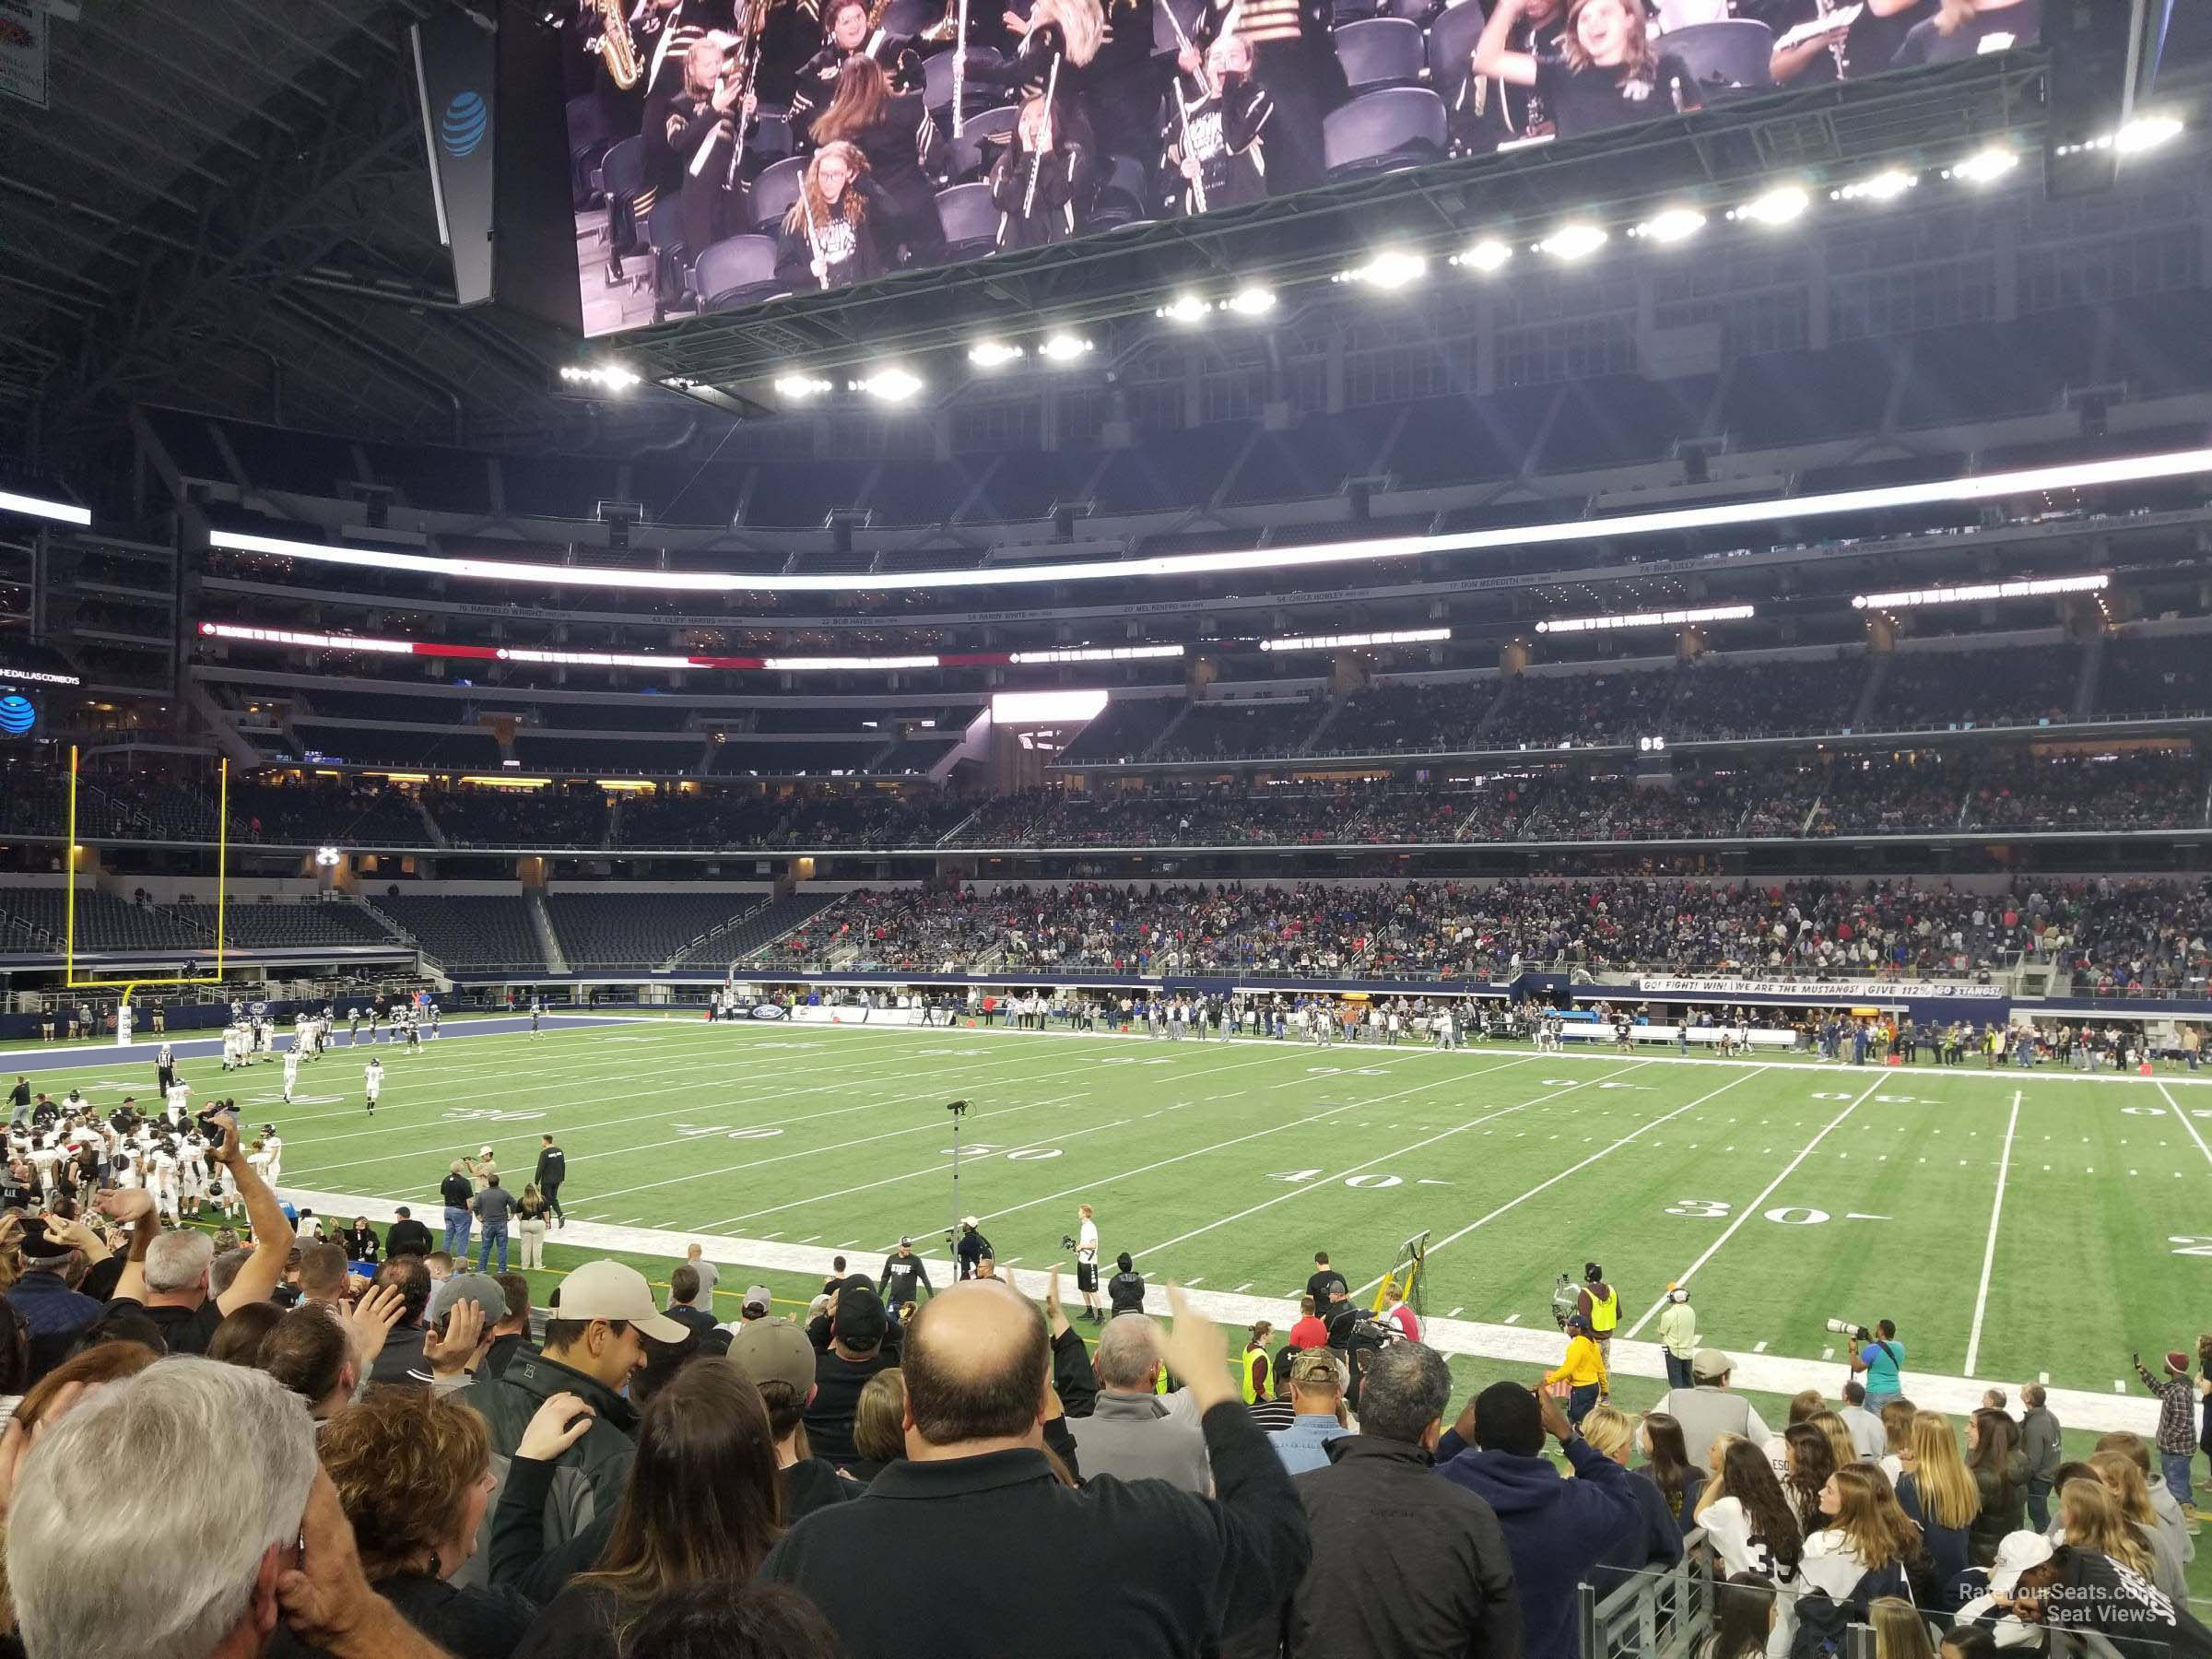 section c133, row 12 seat view  for football - at&t stadium (cowboys stadium)